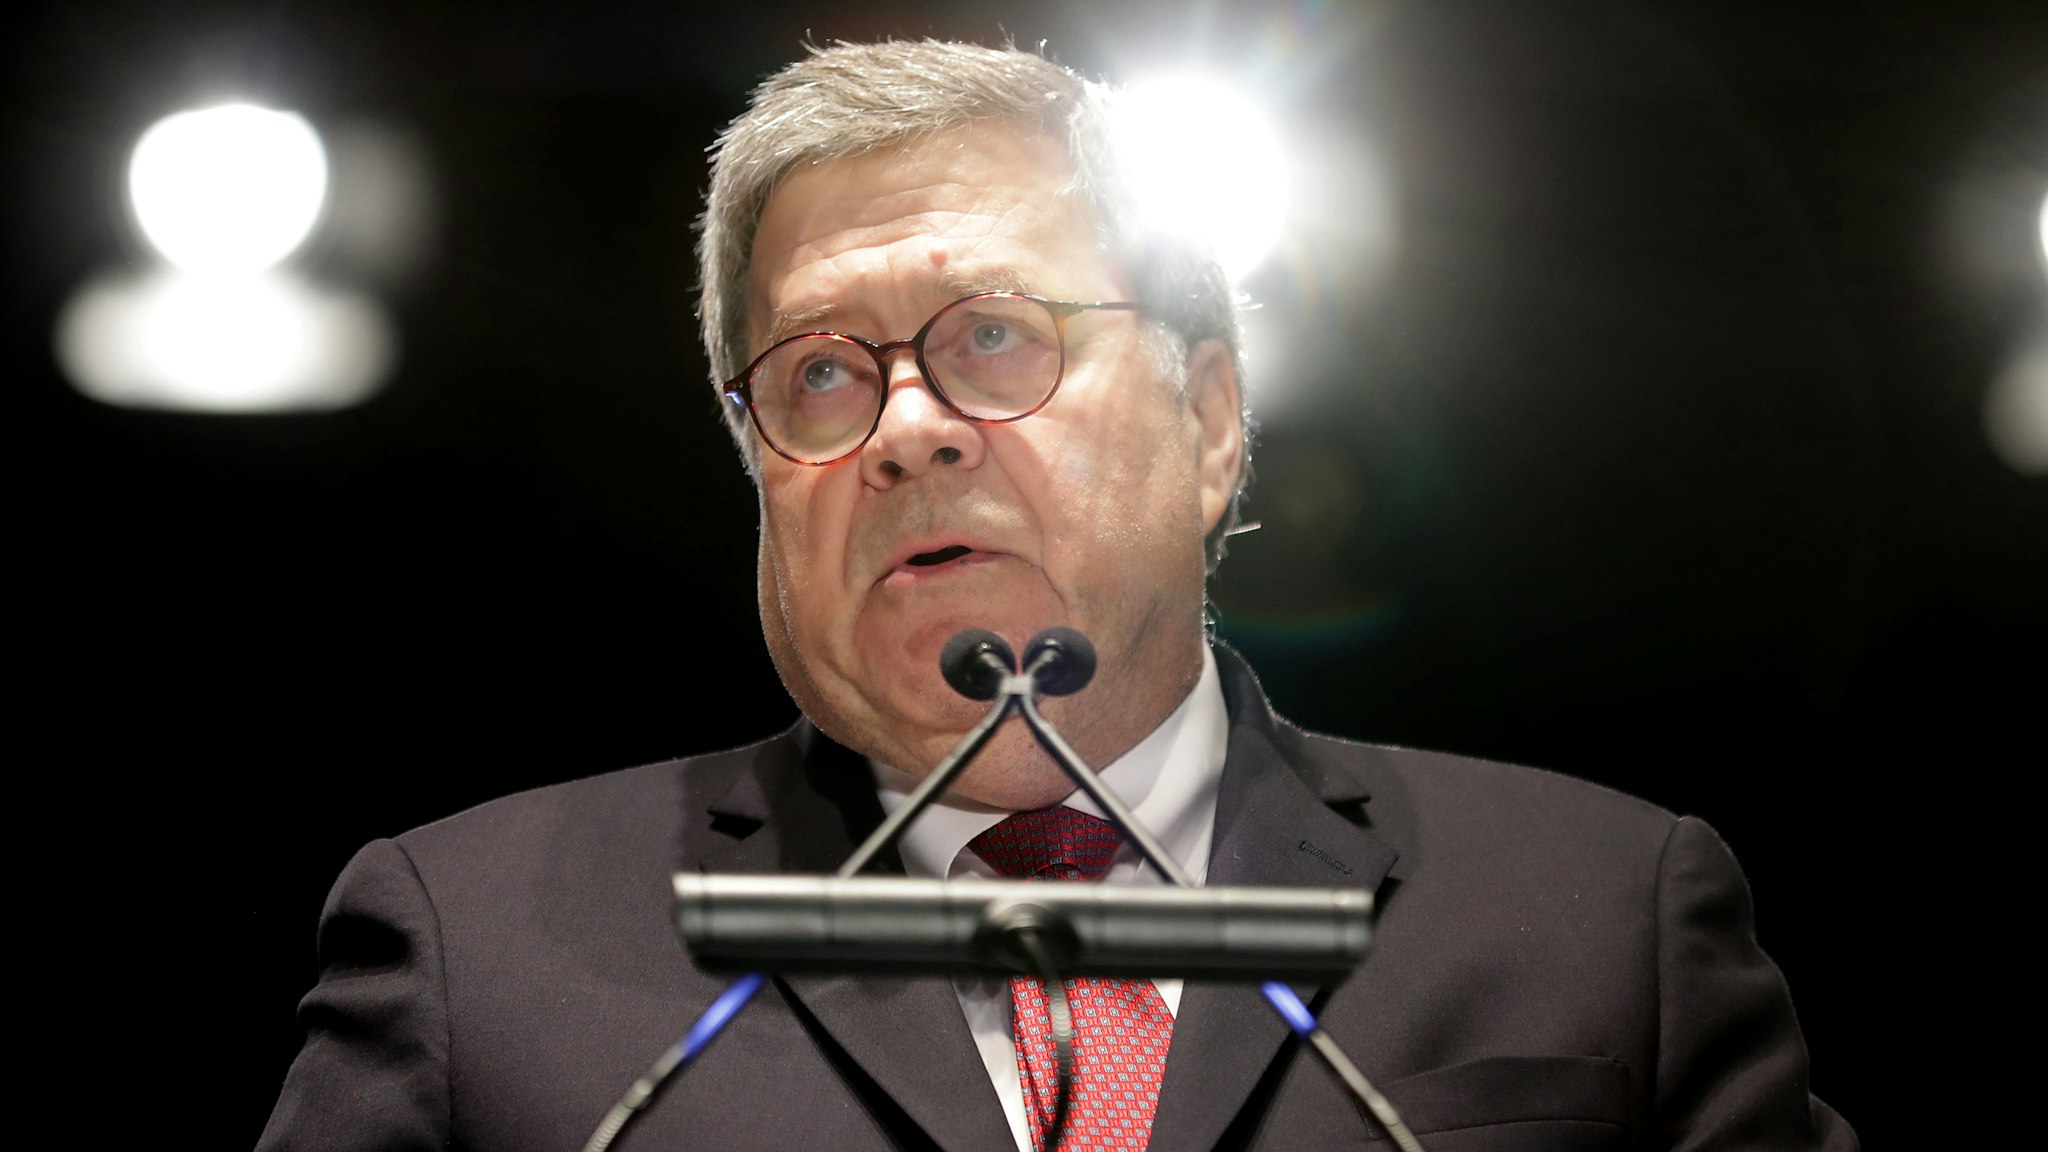 WASHINGTON, DC - MAY 13: U.S. Attorney General William Barr delivers remarks during the National Police Week 31st Annual Candlelight Vigil on the National Mall May 13, 2019 in Washington, DC. Thousands of law enforcement officers, their supporters and family members of those officers who have died in the line of duty gathered on the National Mall to remember and honor them.